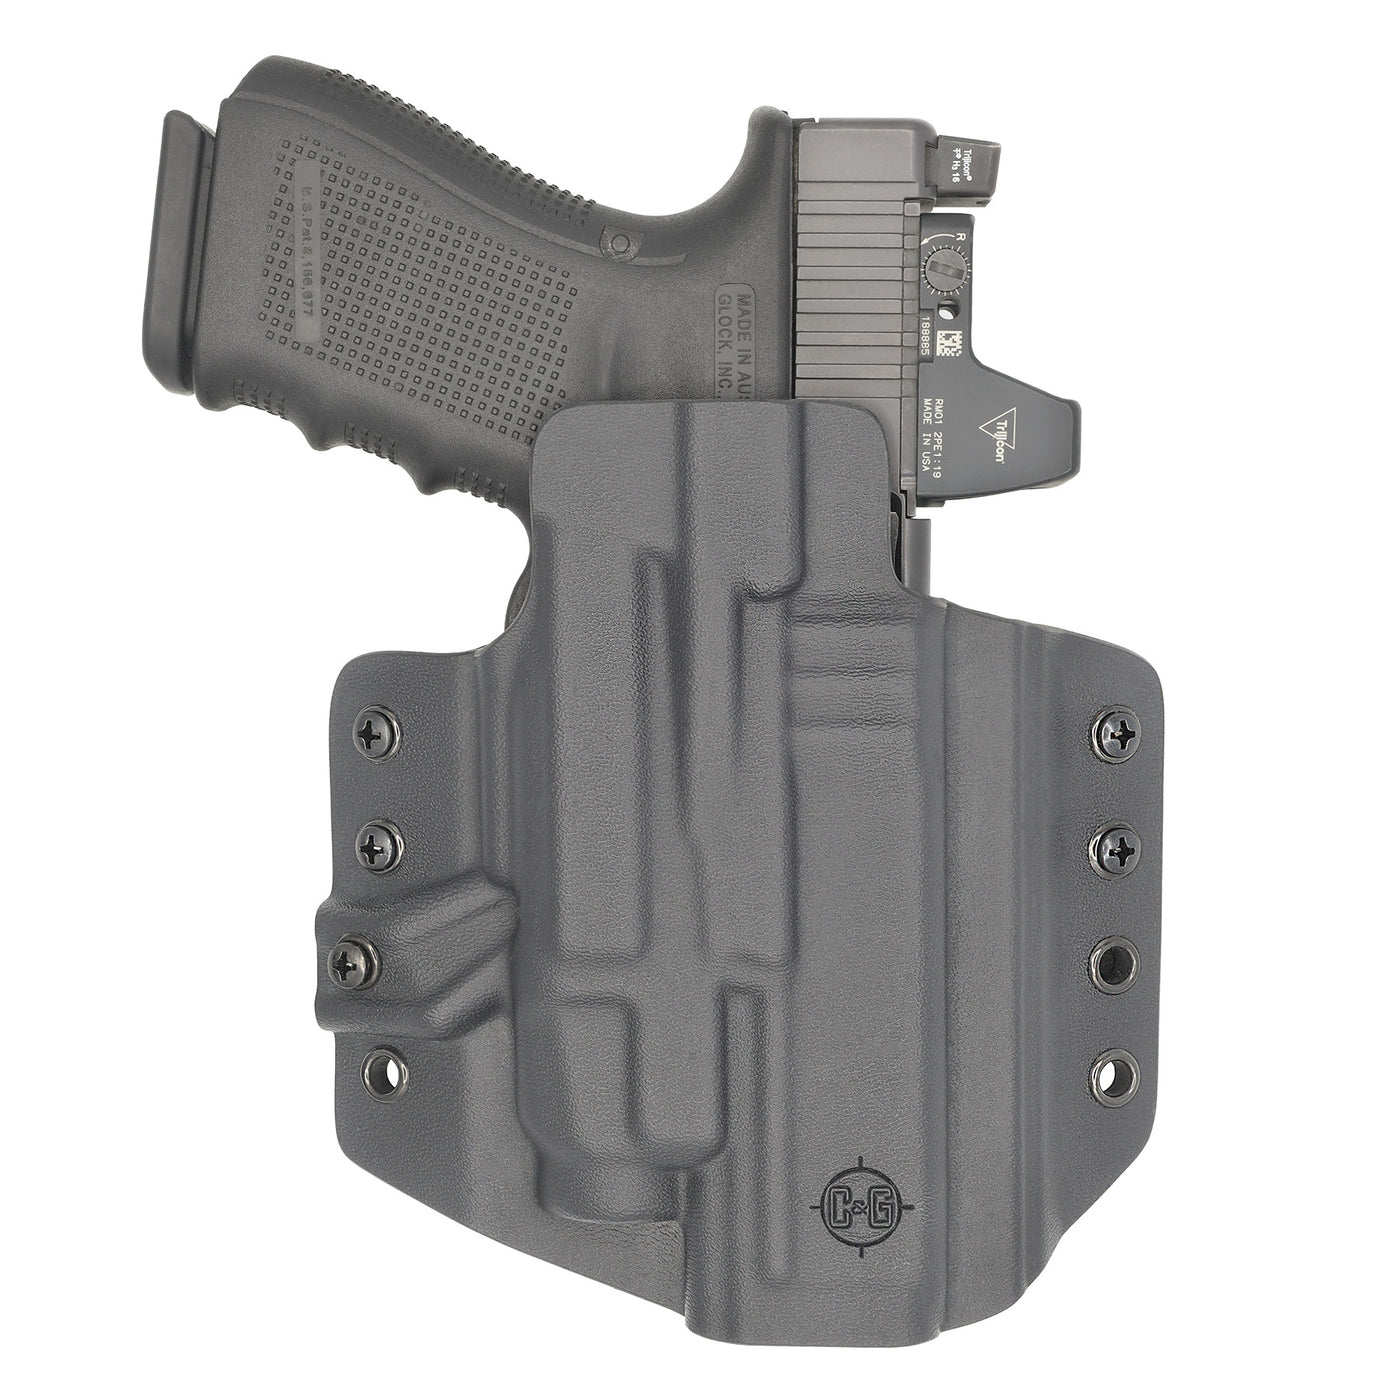 C&G Holsters custom OWB Tactical Glock 29/30 streamlight TLR7/a in holstered position